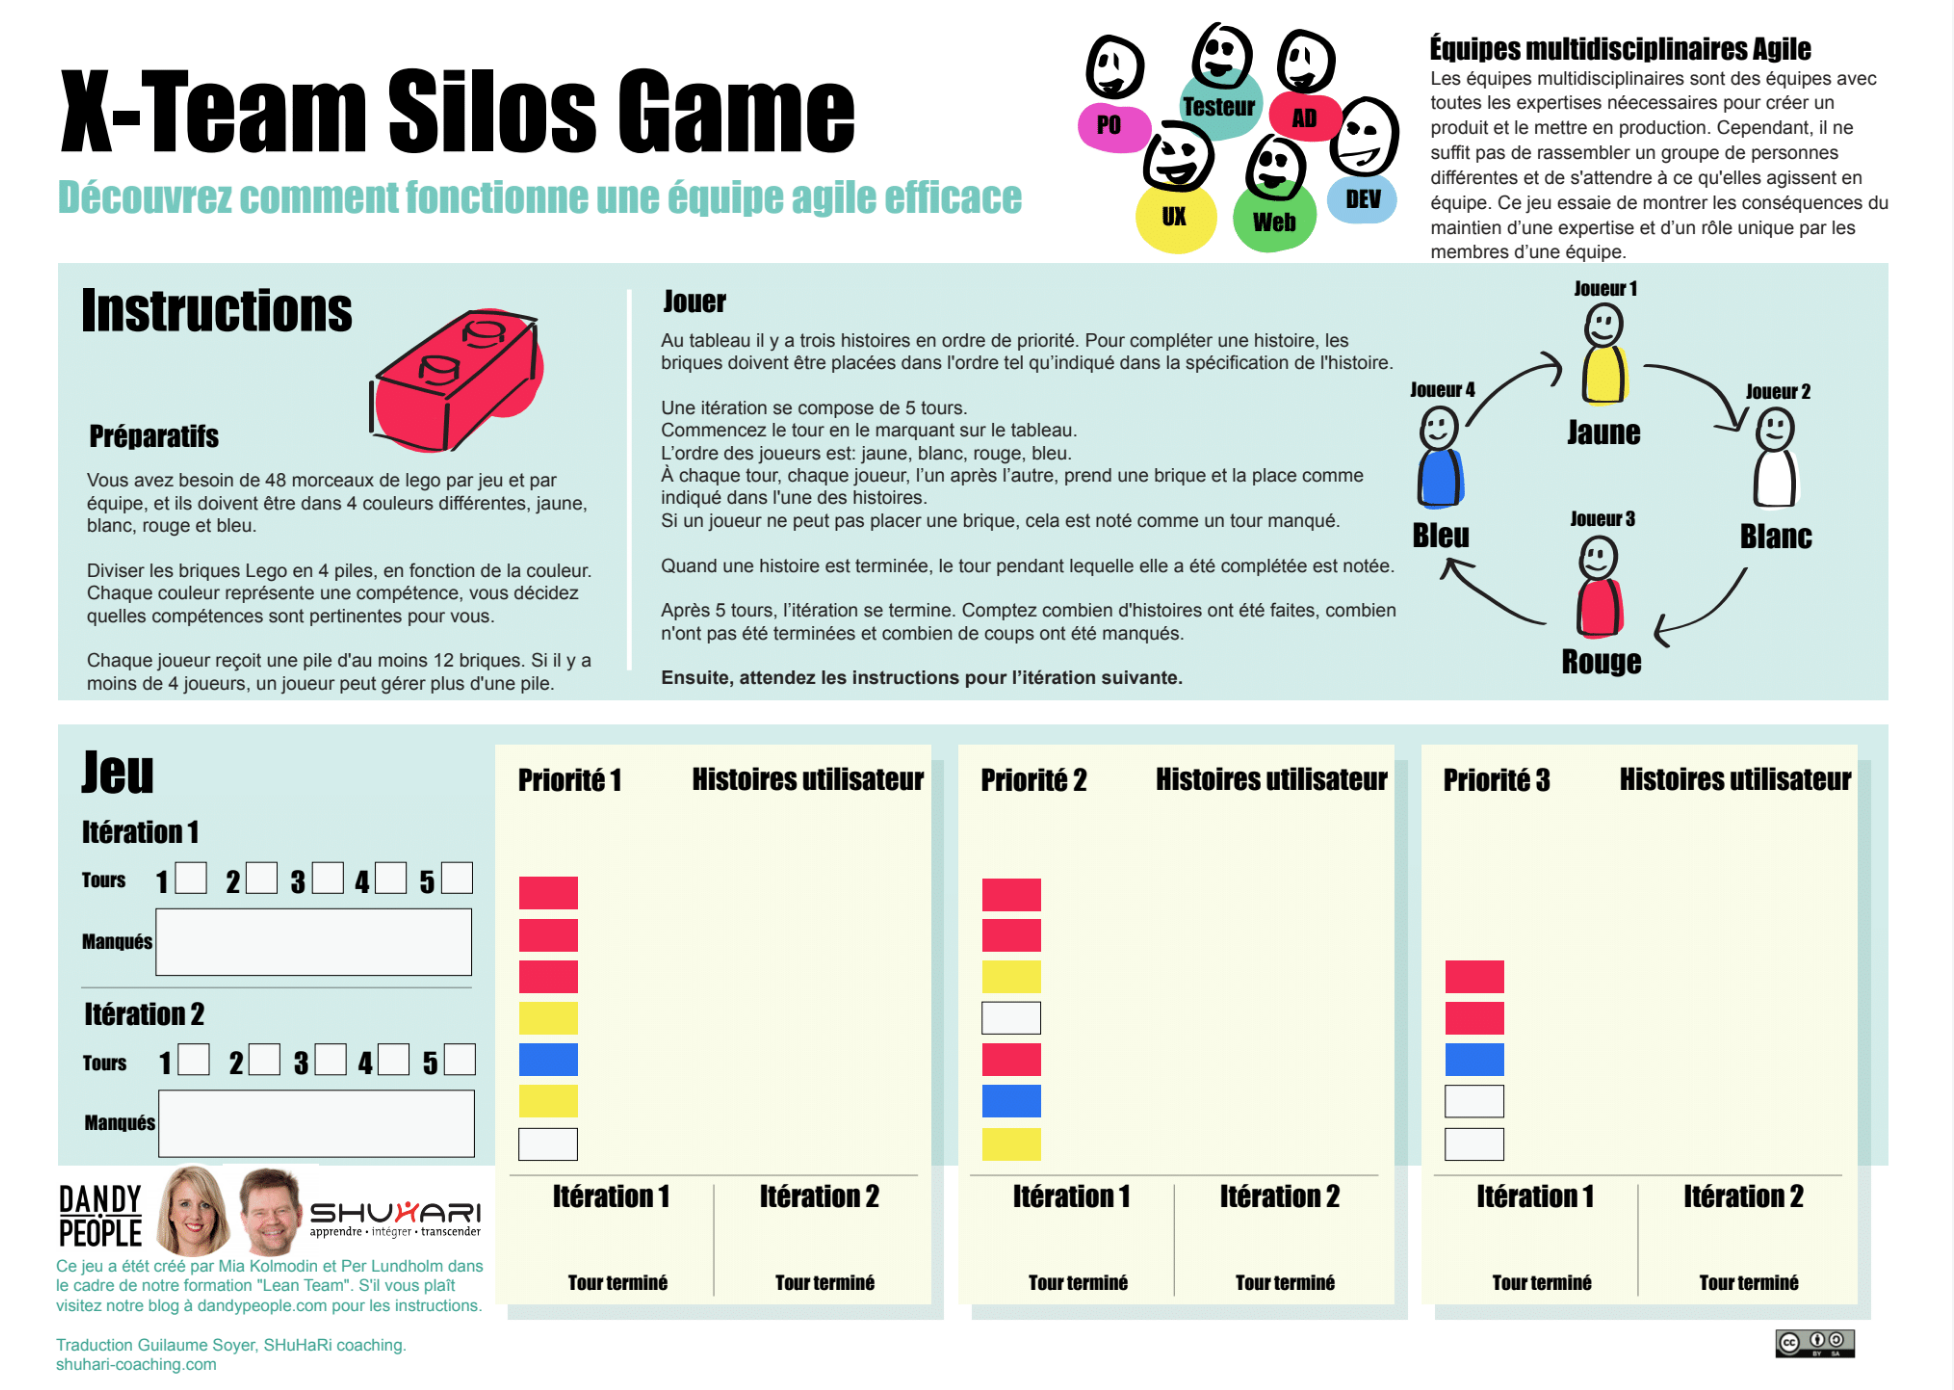 X-team silos game french